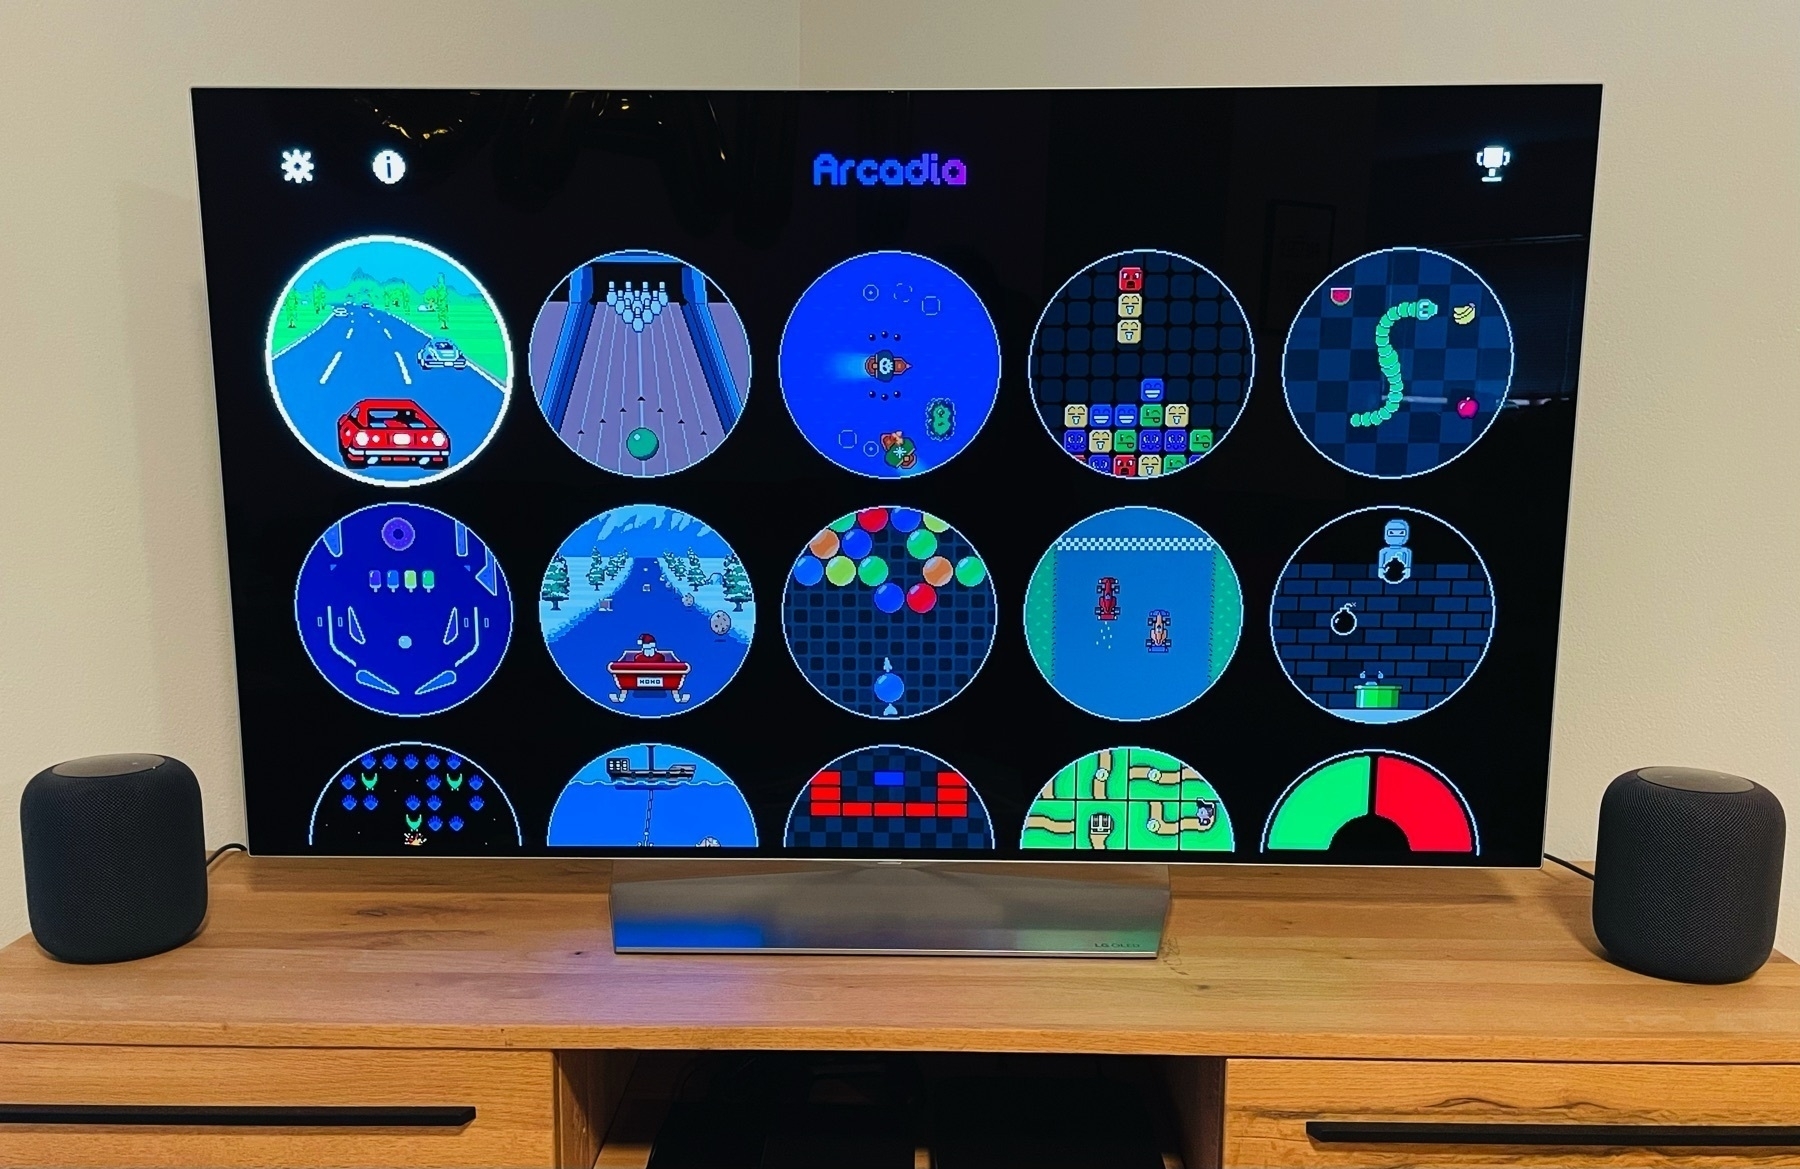 Arcadia June is shown running on an Apple TV 4K connected to an LG OLED TV, with the interface of games in a grid with circular icons. Two space grey HomePods in a stereo pair are also shown either side of the TV.